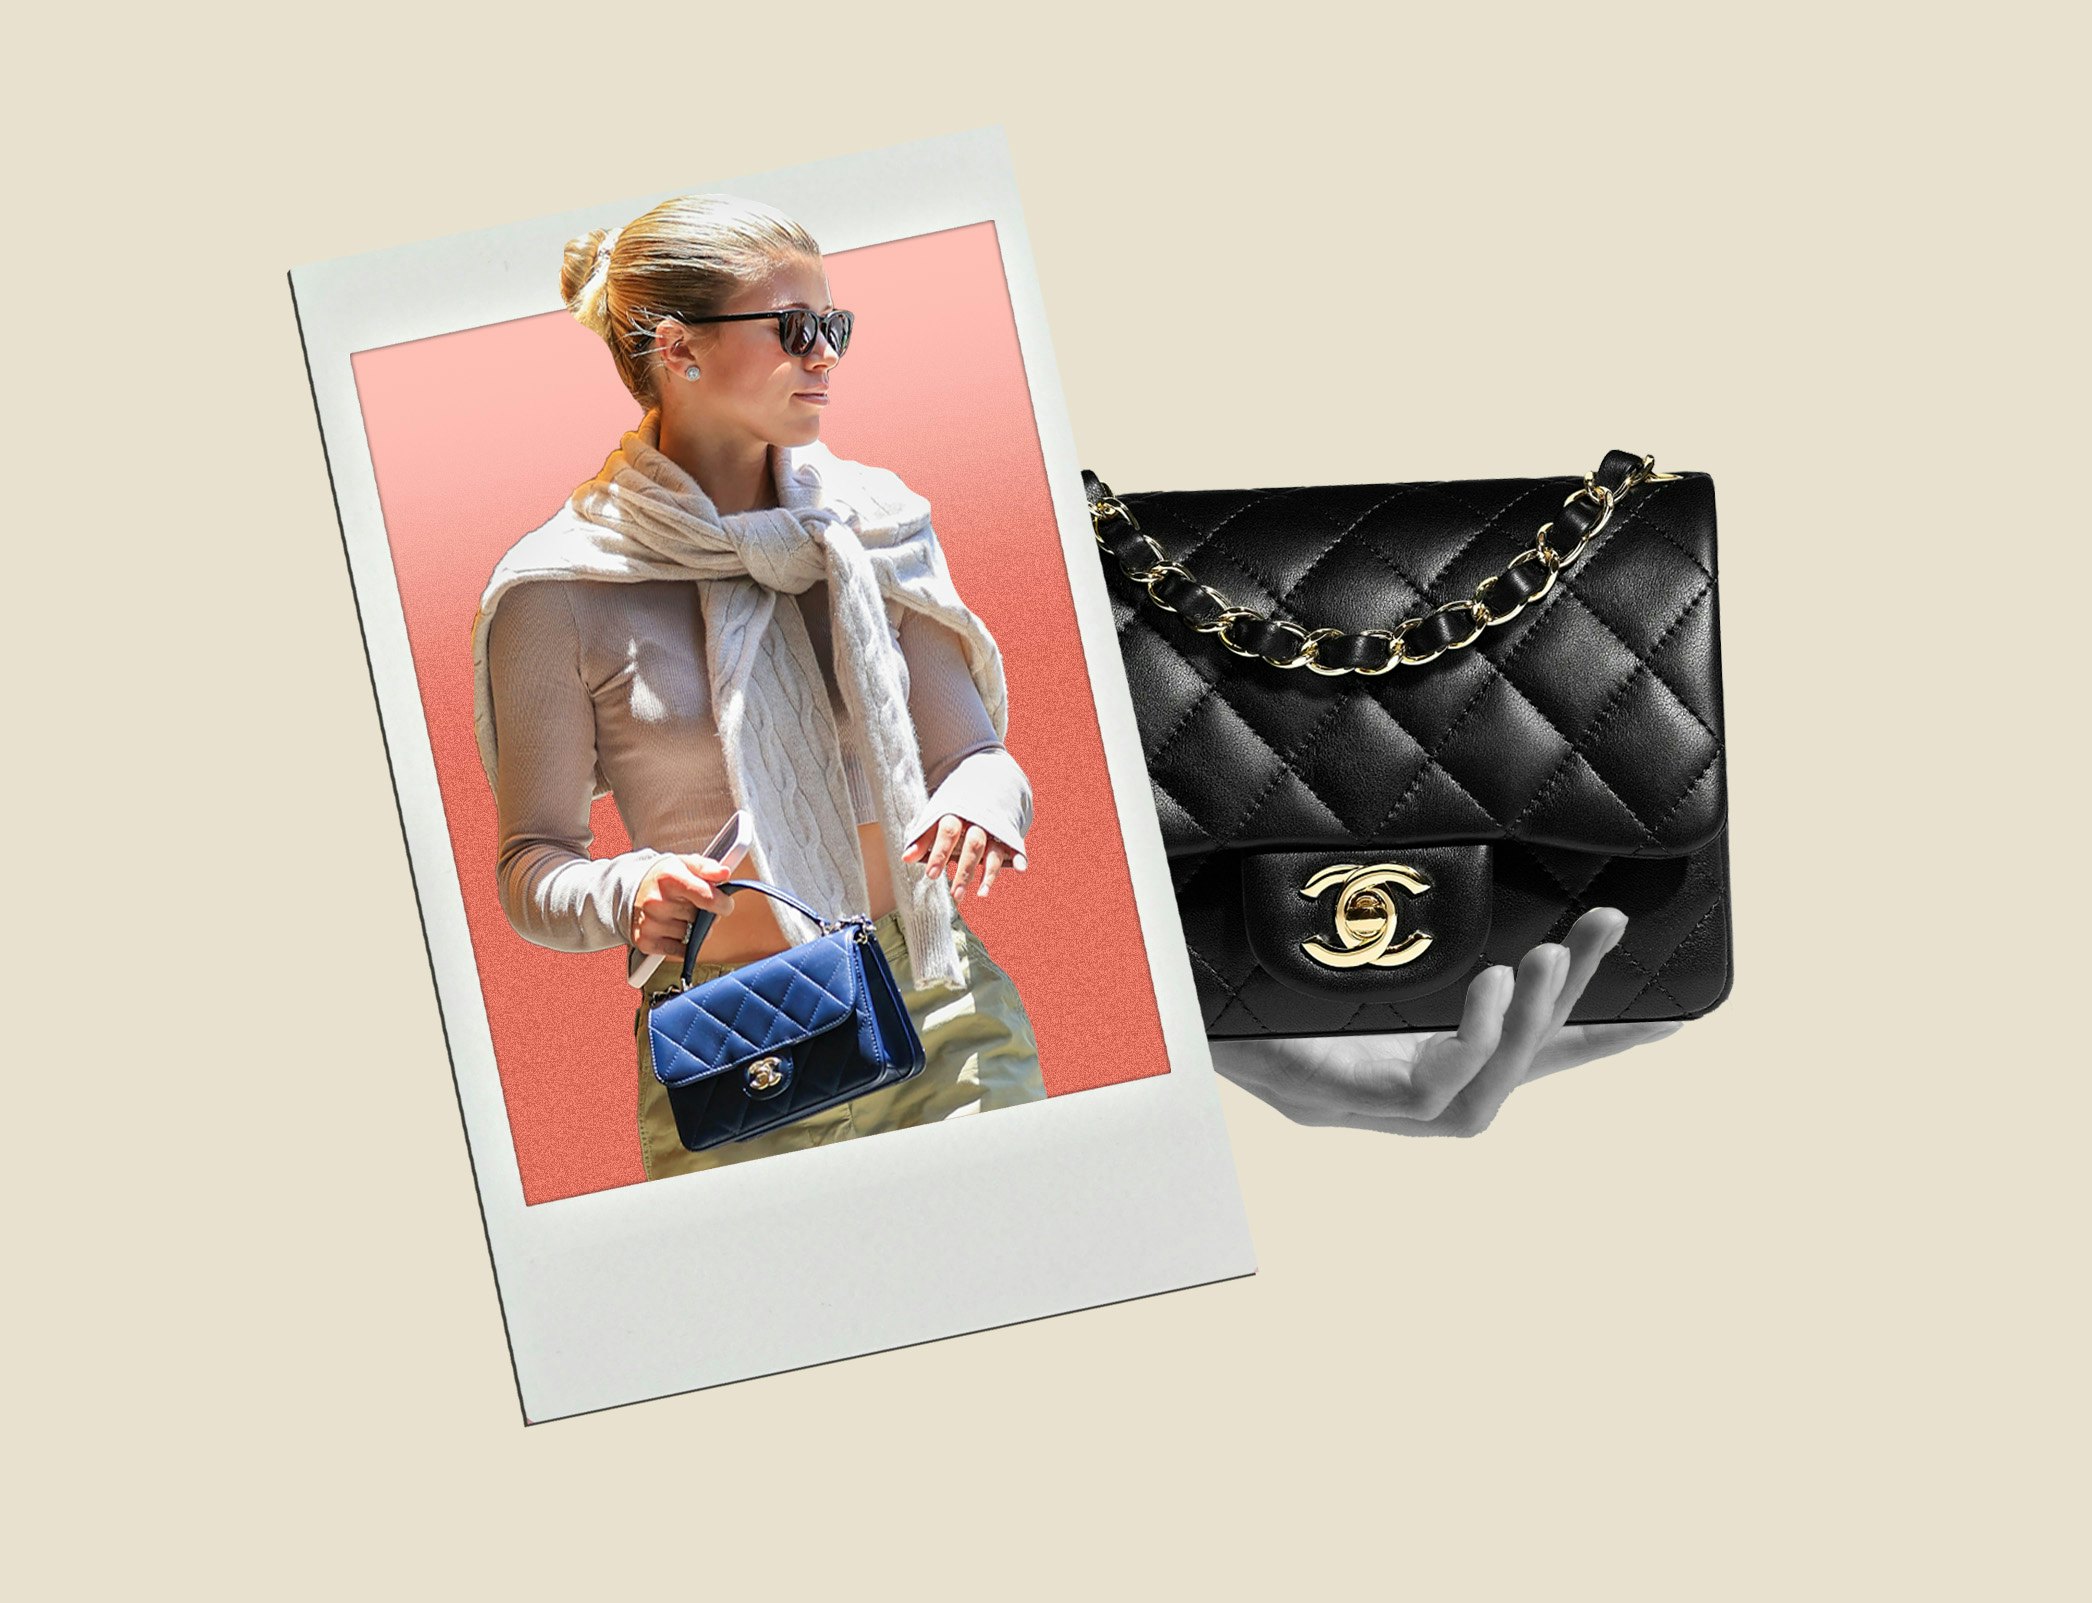 50 More Photos That Prove Chanel Bags are the Reigning Celebrity Favorites   PurseBlog